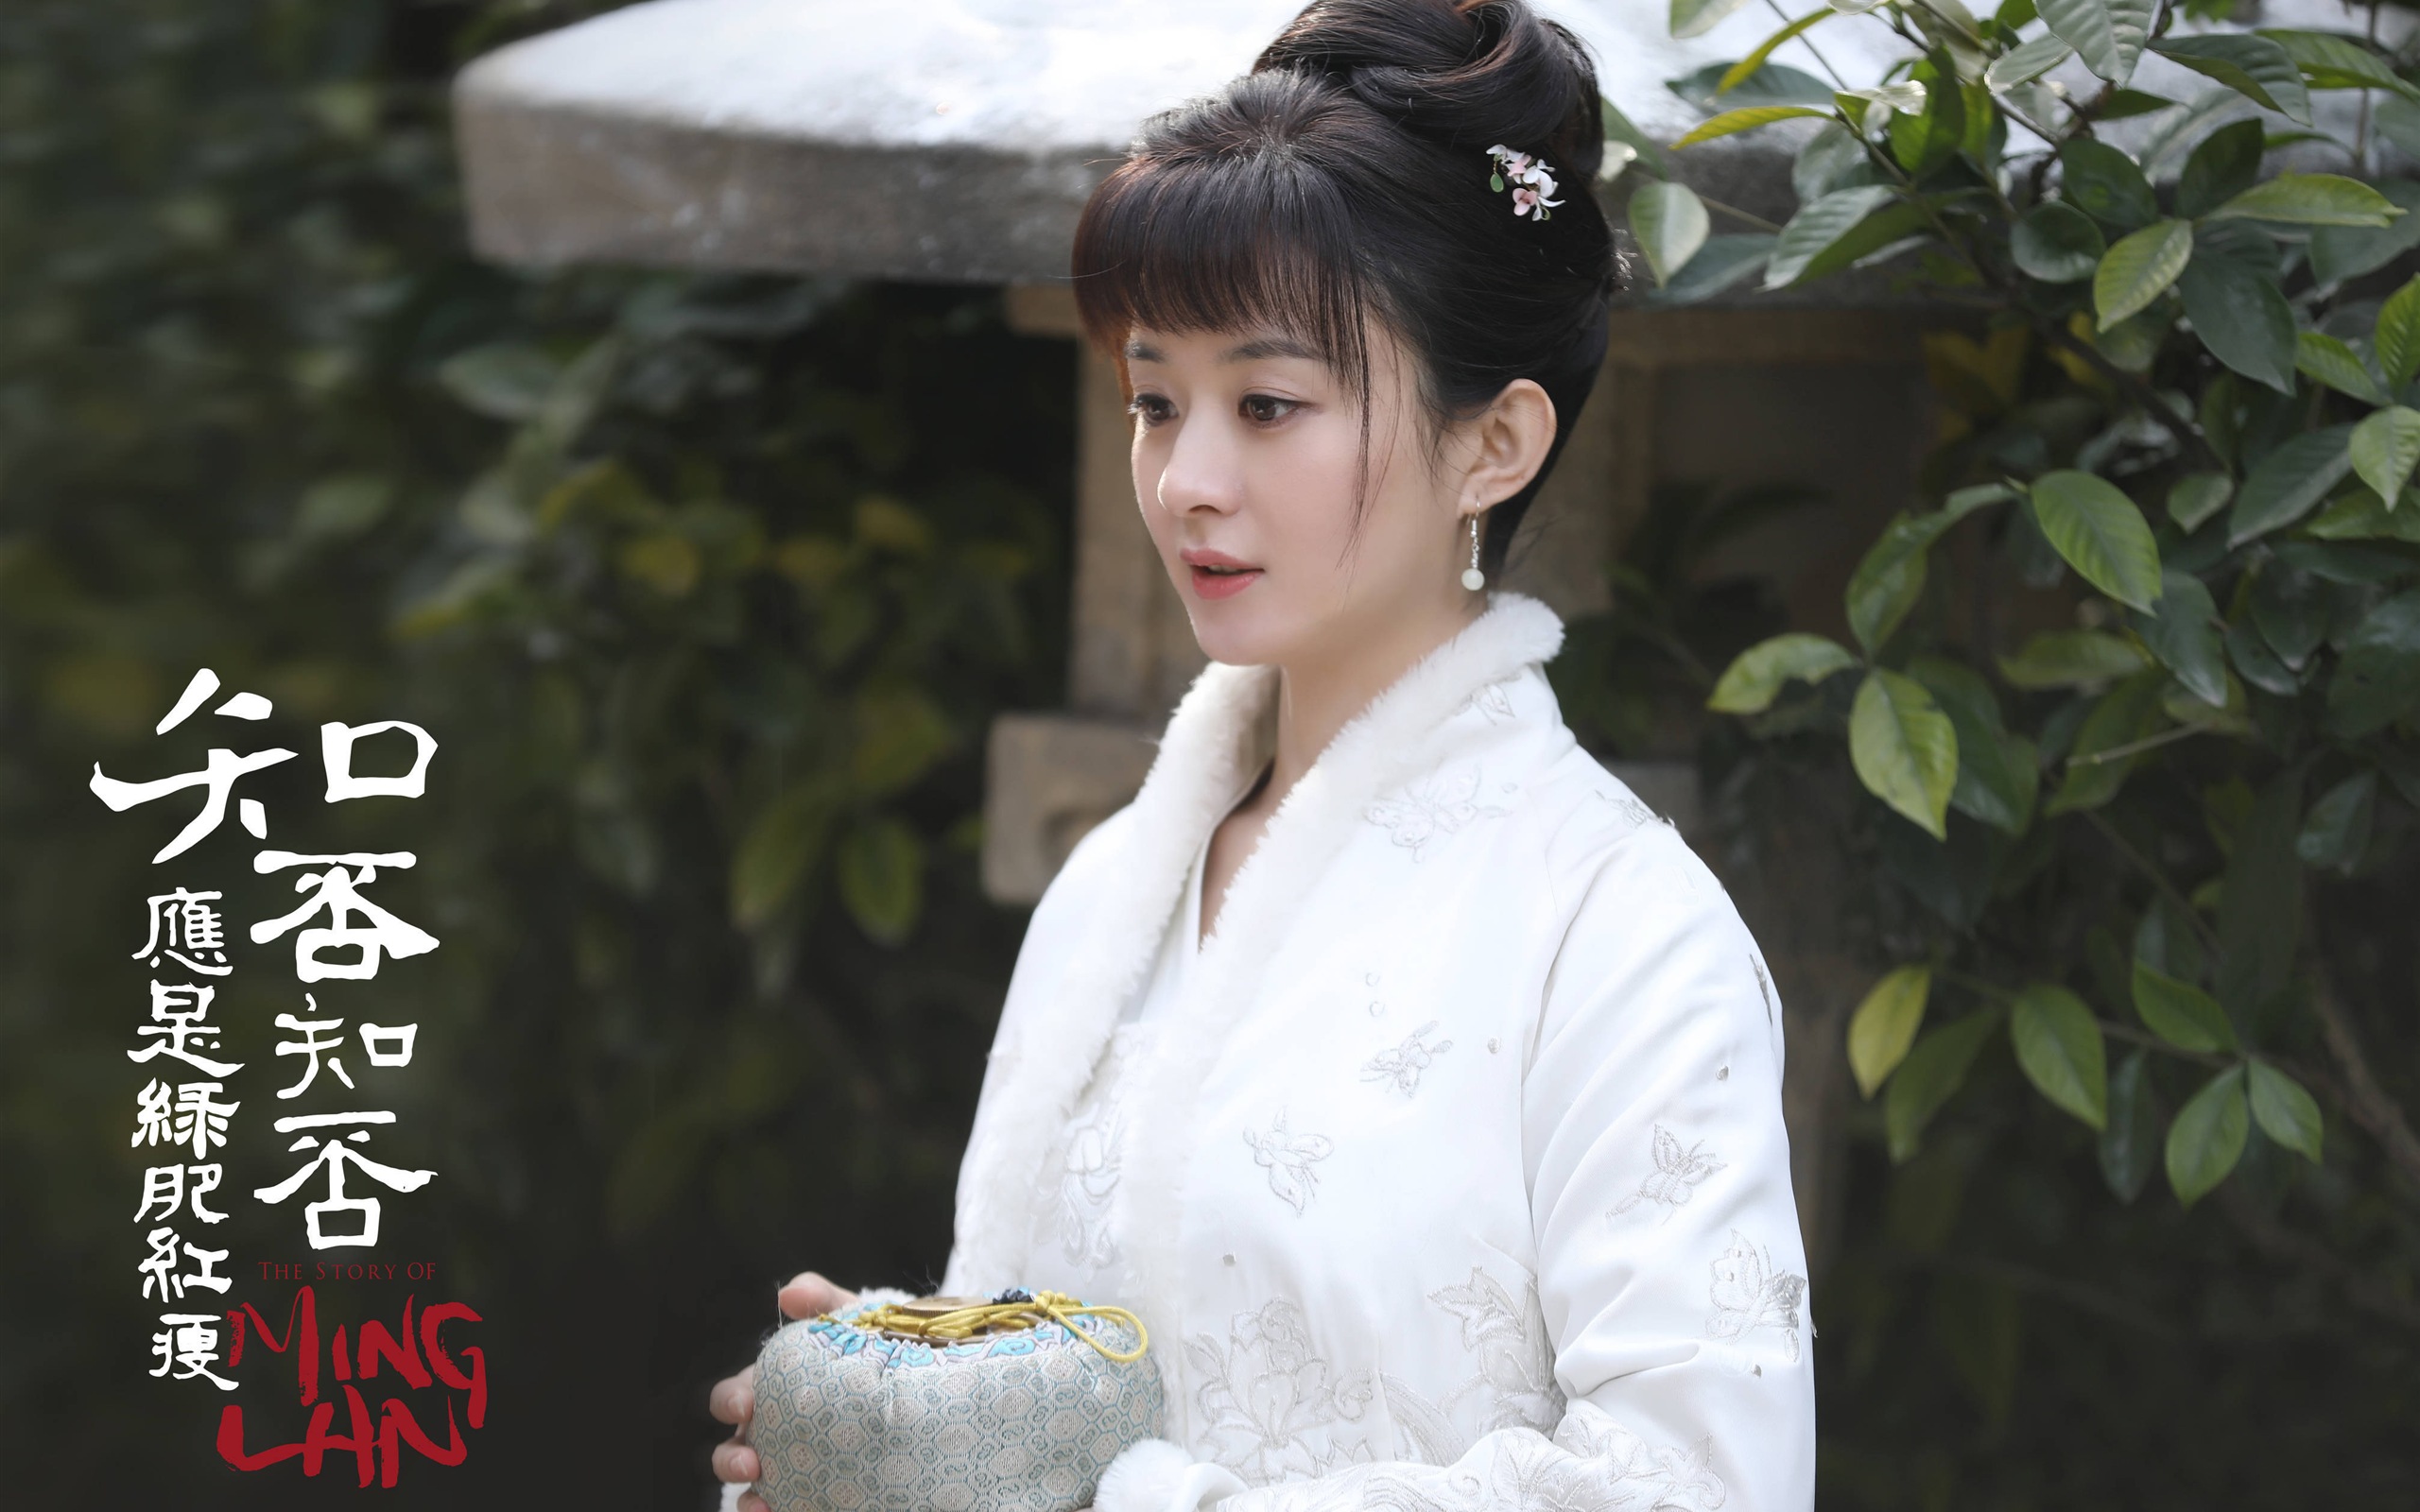 The Story Of MingLan, TV series HD wallpapers #51 - 2560x1600